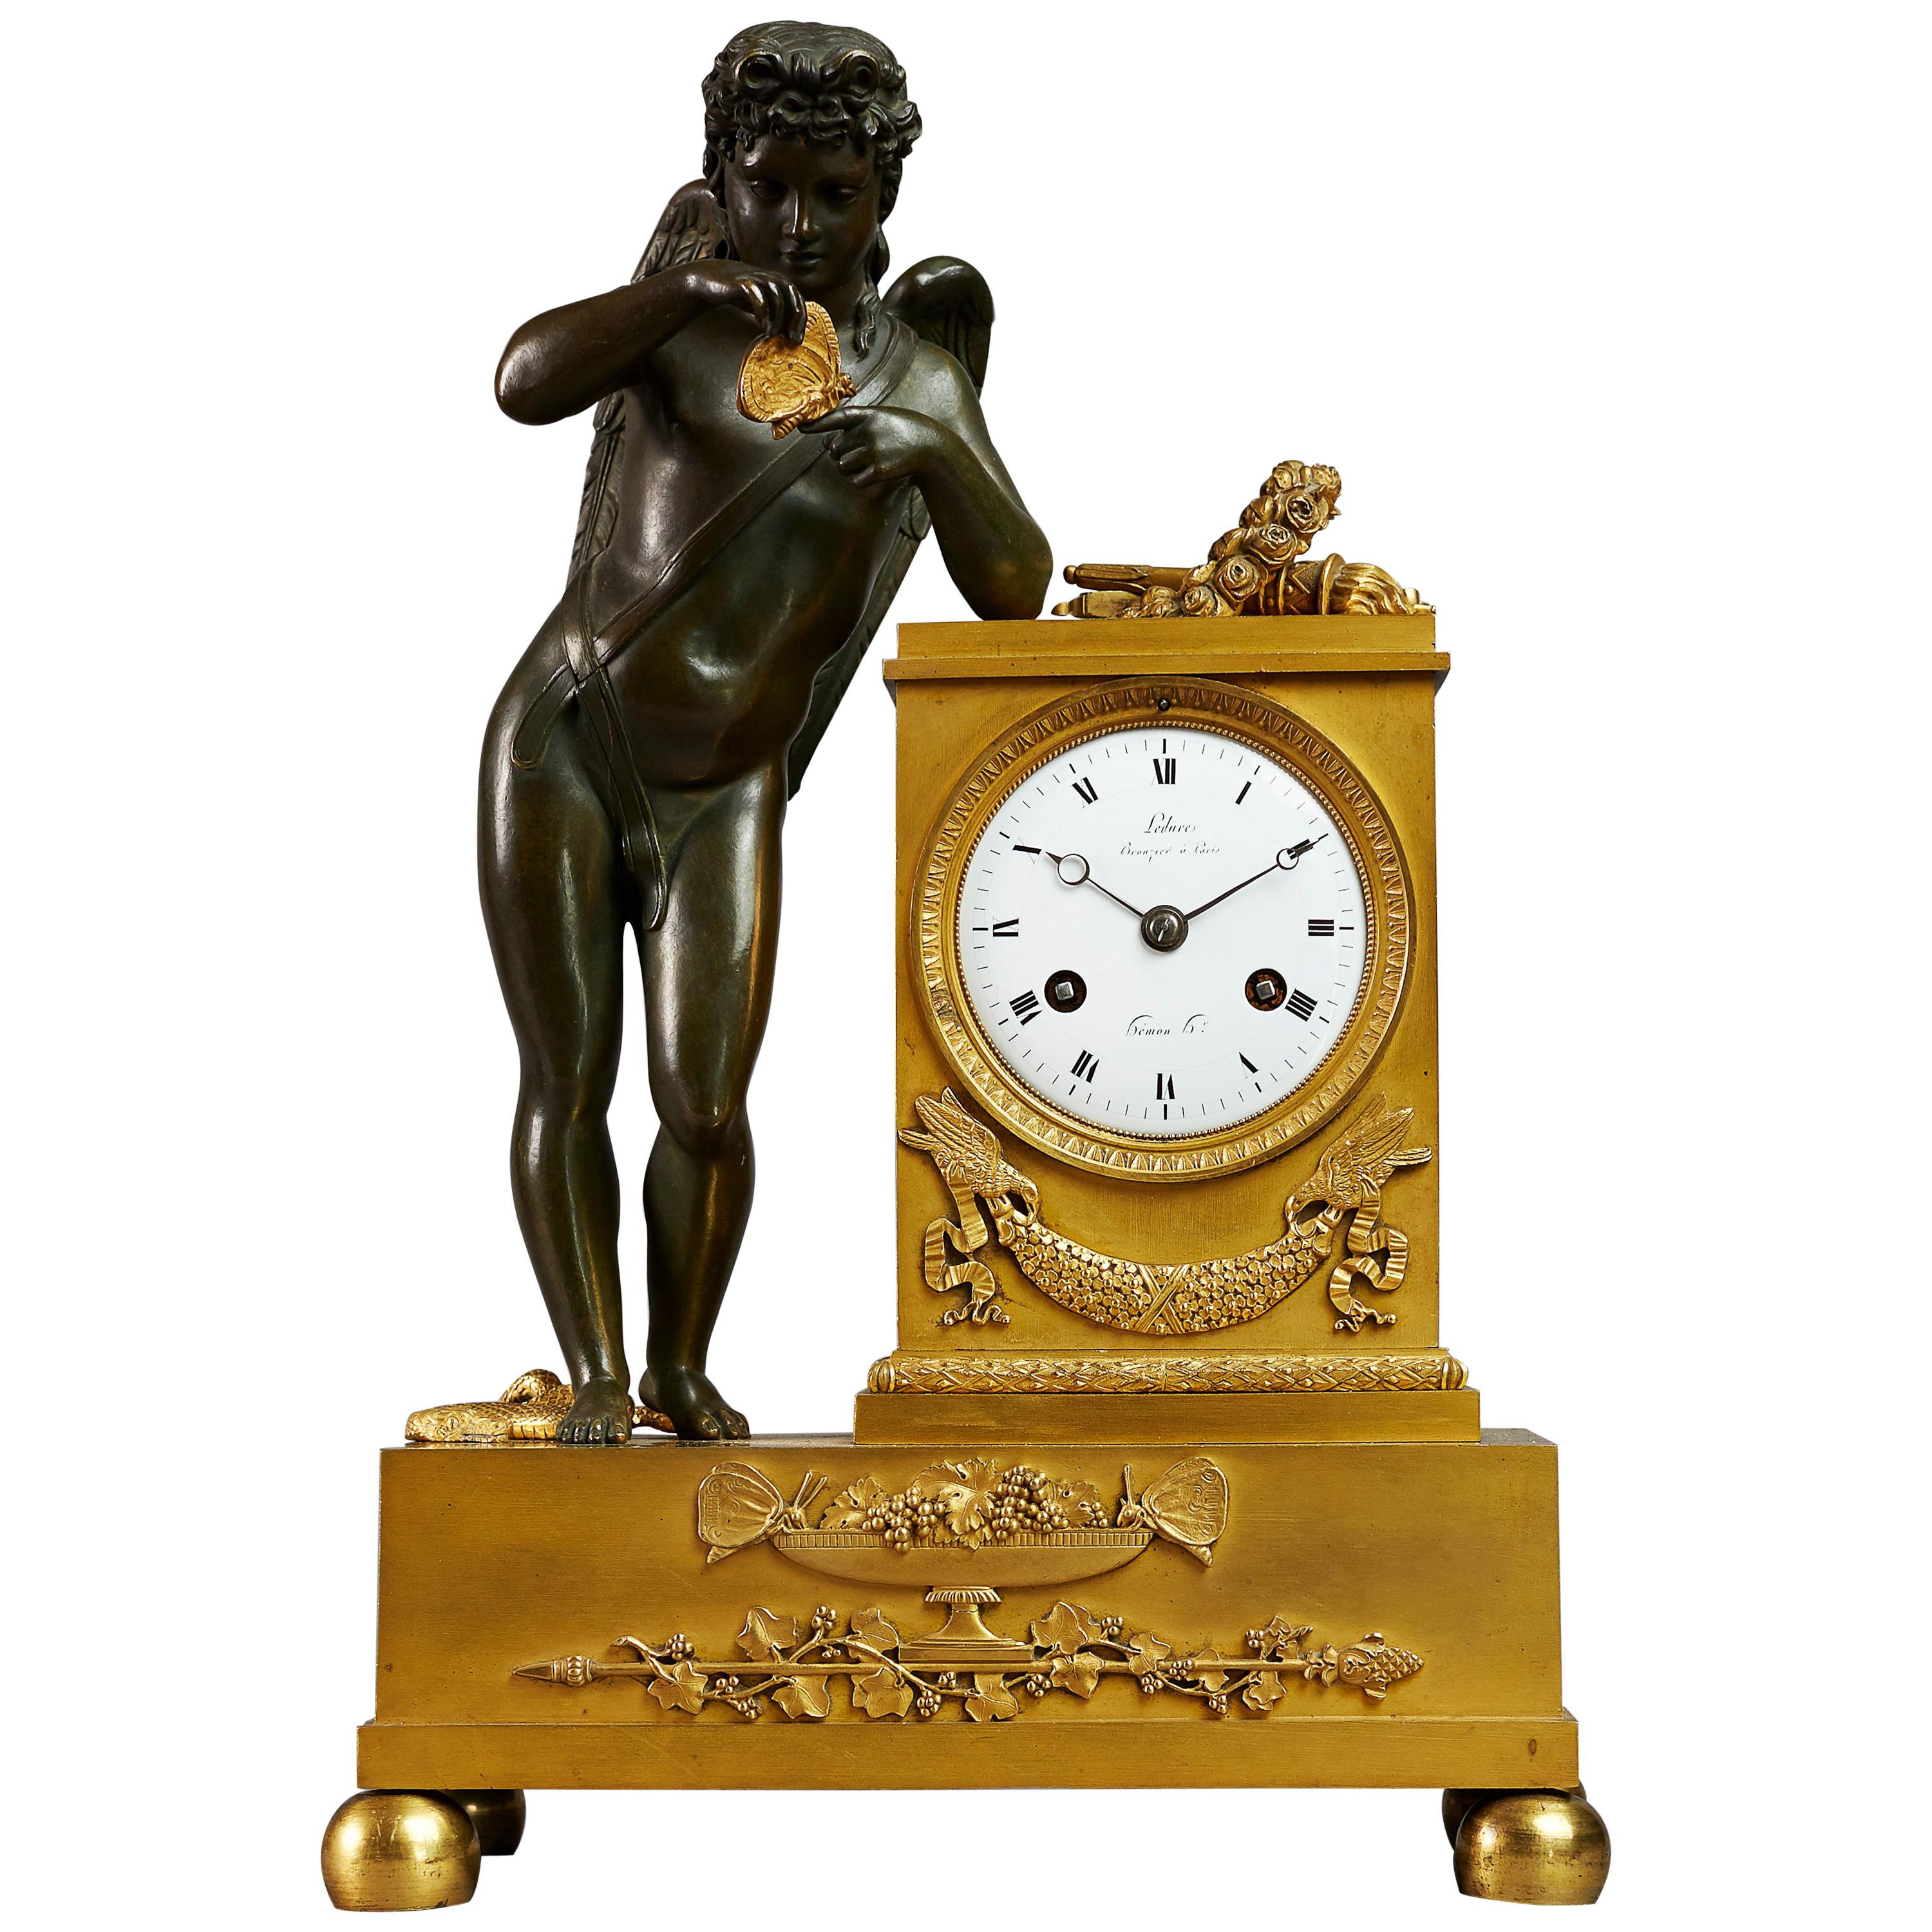 Early 19th Century Empire Mantel Clock by Ledure with Apollo or Eros